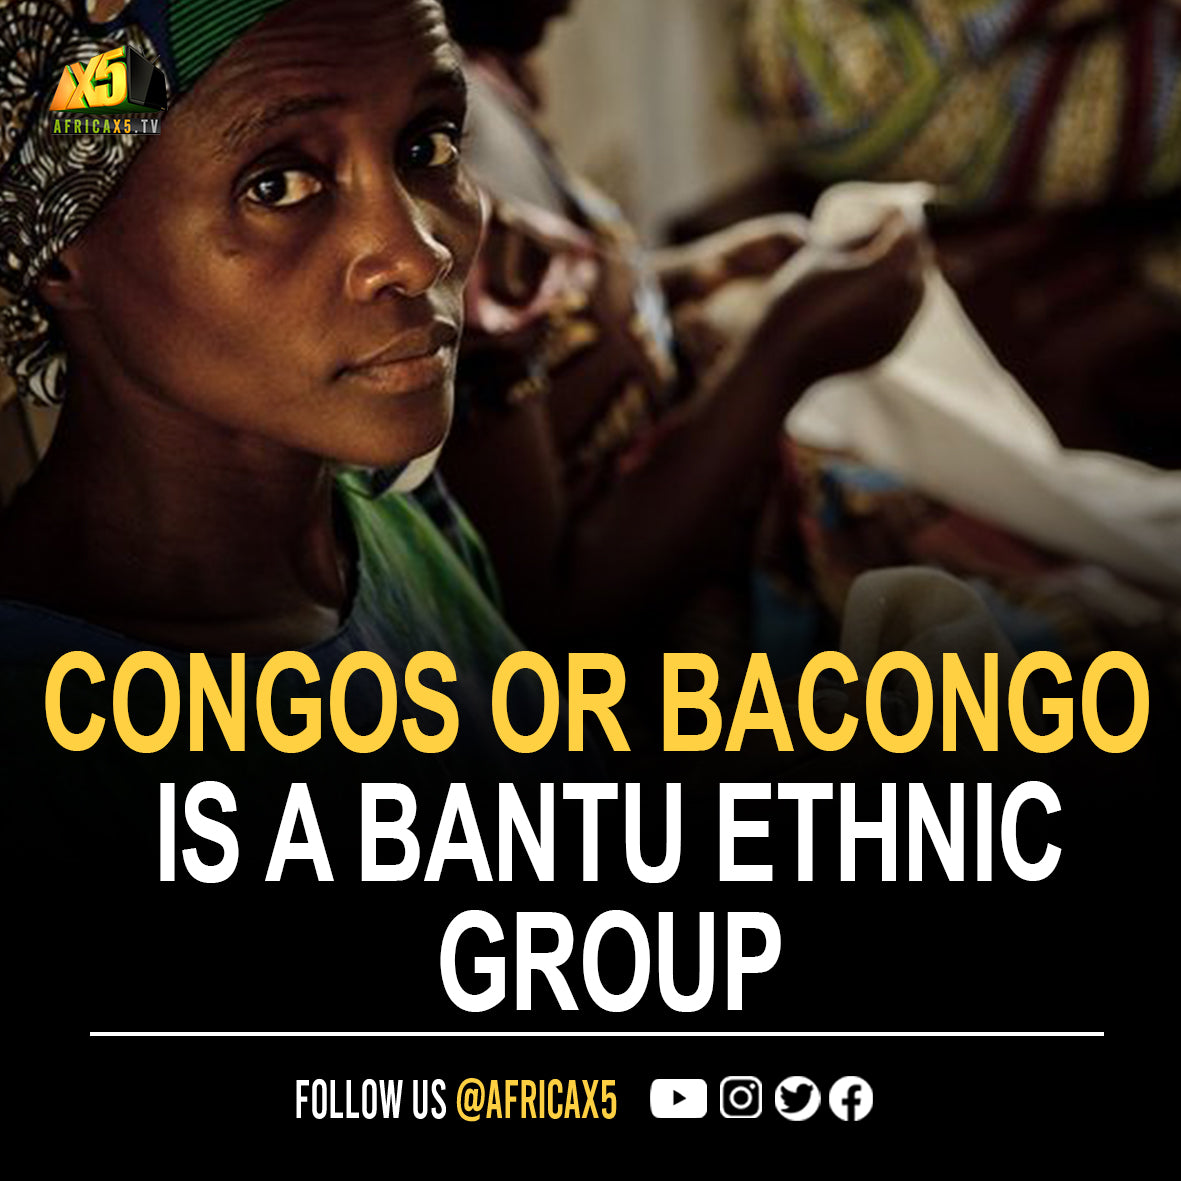 Congos or Bacongos (in Quicongo: Bakongo) is a Bantu ethnic group that lives in a wide strip along the Atlantic coast of Africa